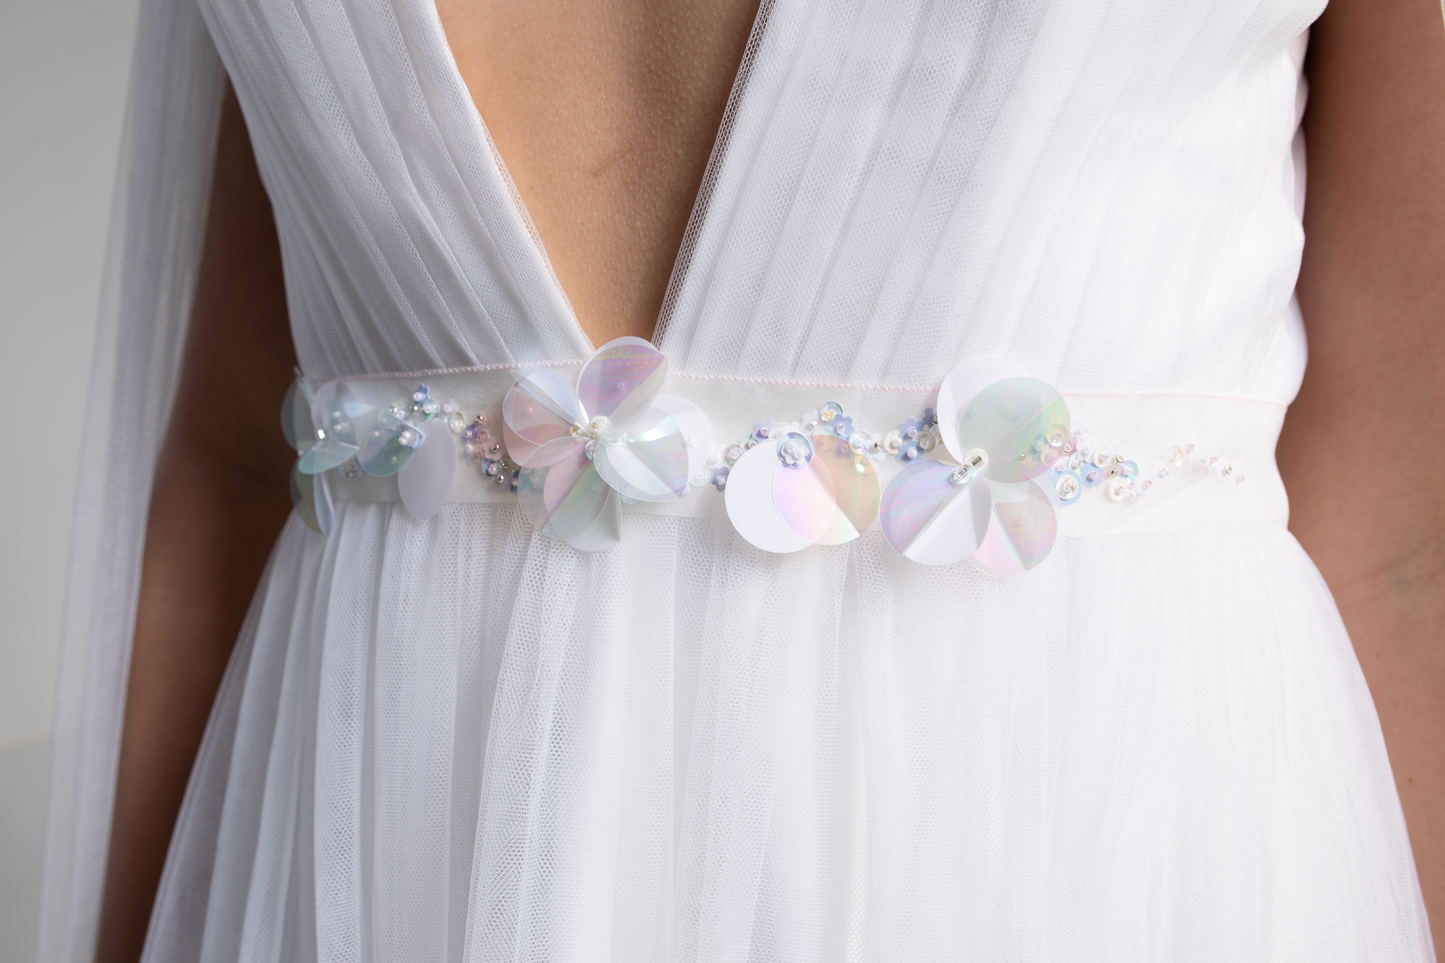 Hand embroidered silk organza bridal sash, a decorative sash hand-sewn with lots of sequins and beads in a floral design. This bridal belt is part of a collection of luxury hand-embroidered bridal accessories and bridal head wear.